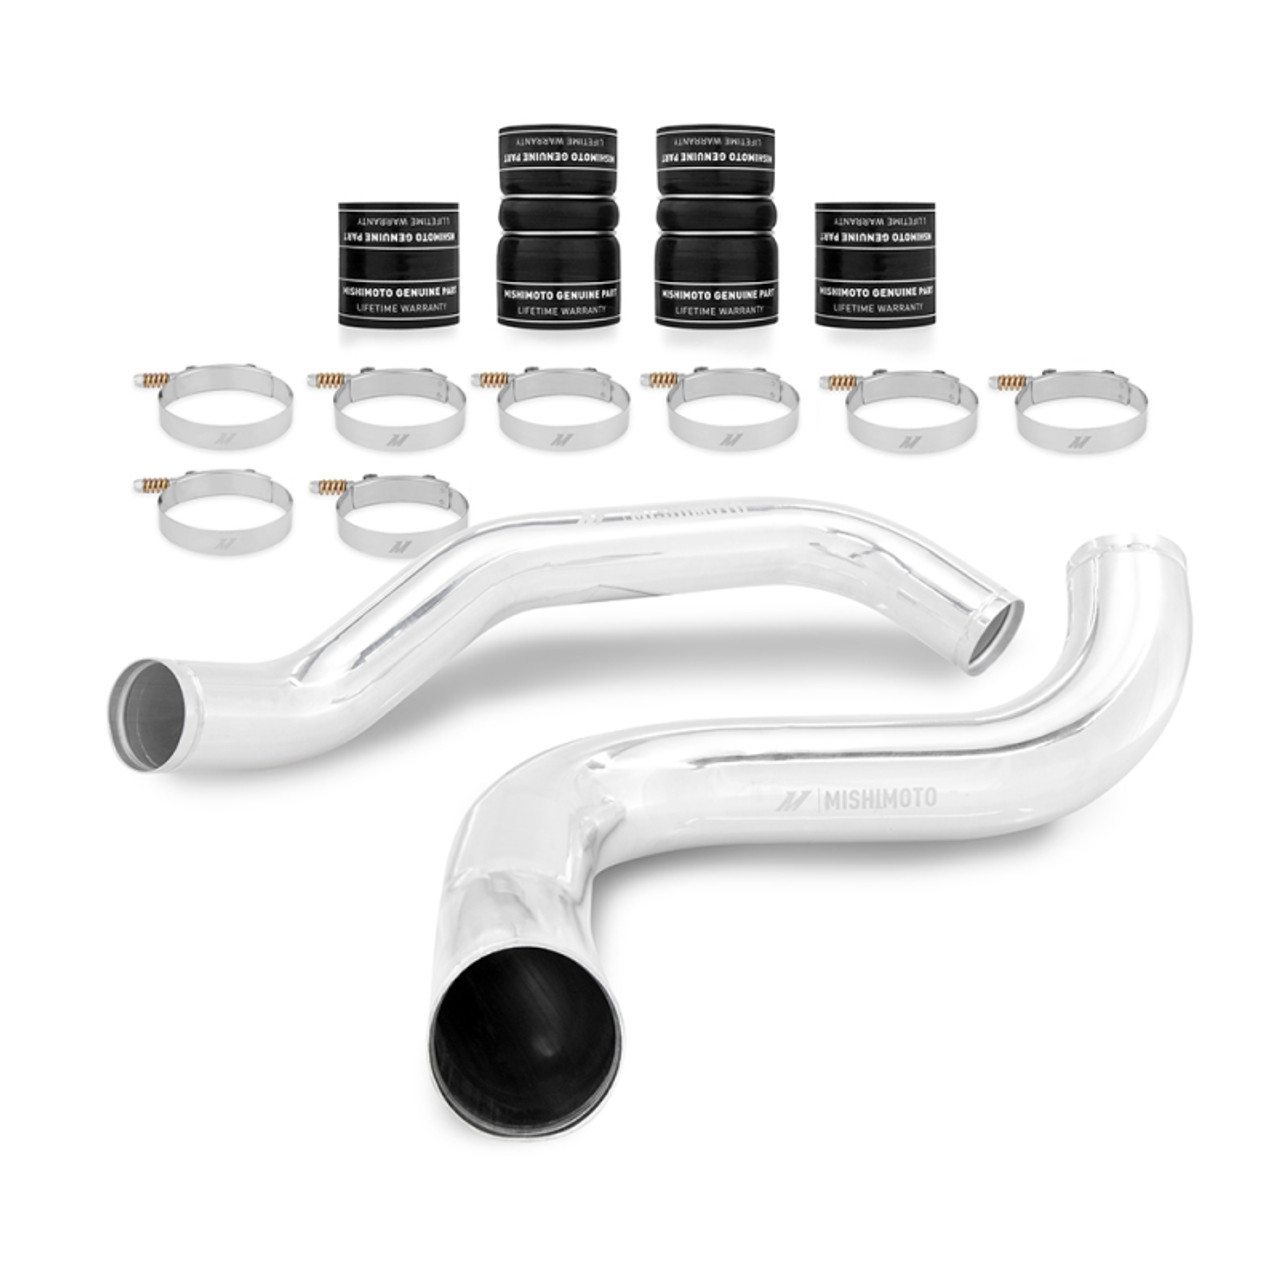 Mishimoto 99-03 Ford 7.3L Powerstroke PSD Intercooler Pipe/Boot Kit - Polished - MMICP-F2D-99KP Photo - Primary